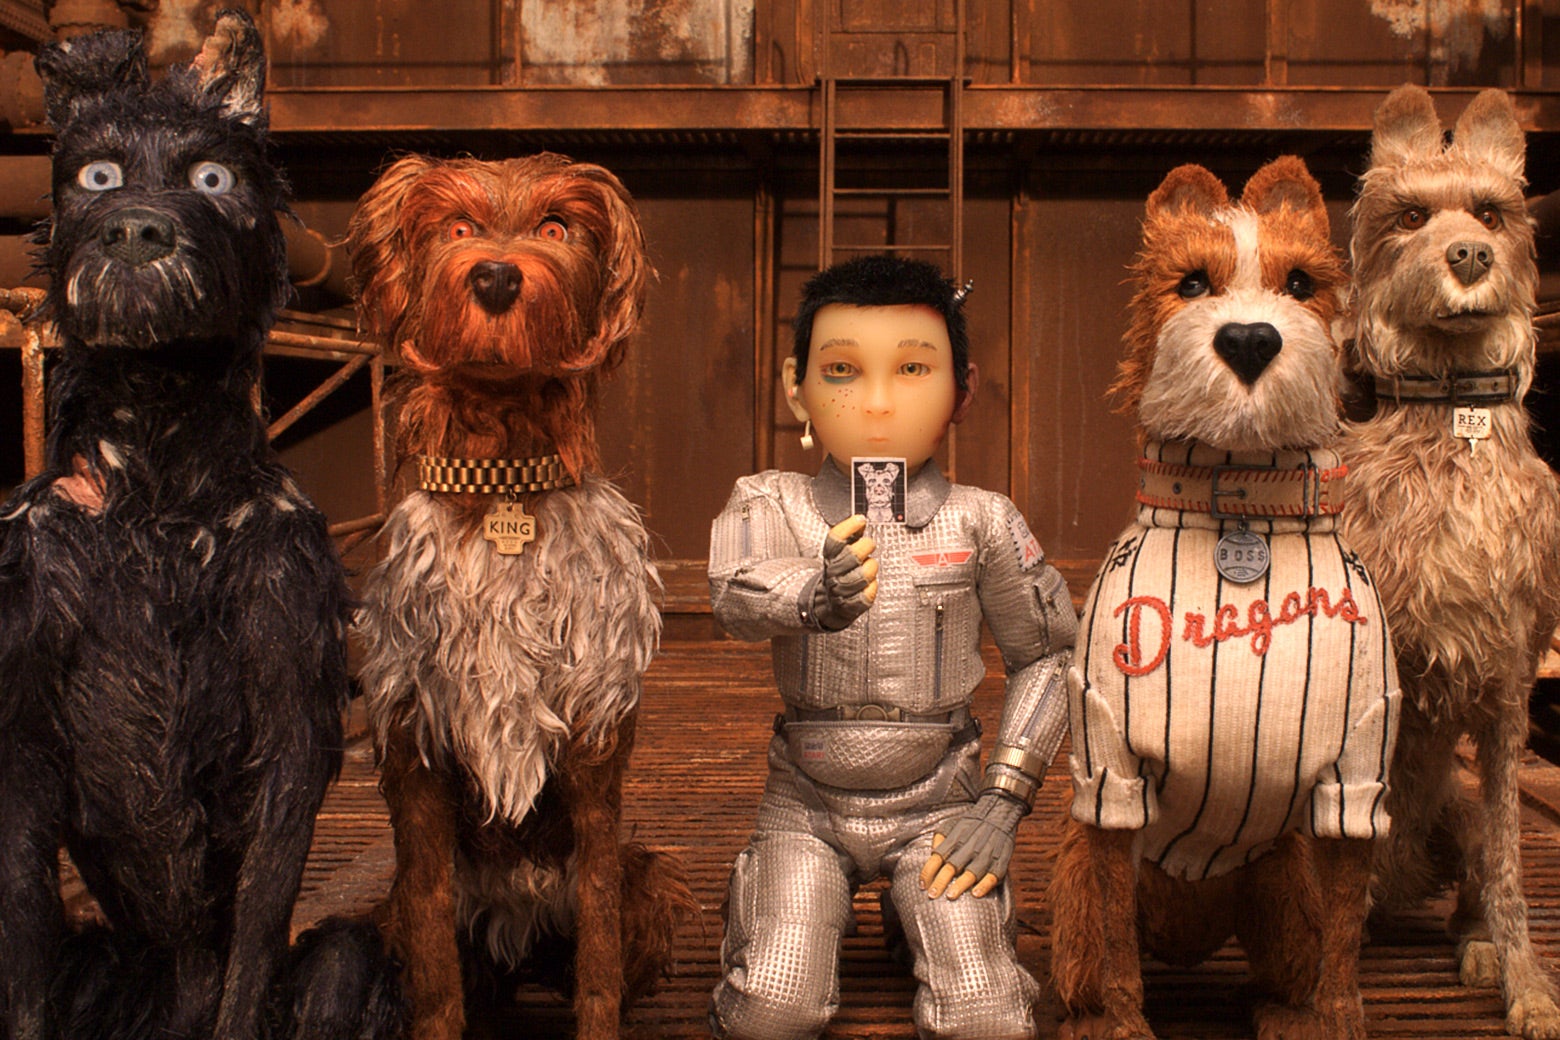 Isle of Dogs, Wes Anderson's new movie, reviewed.